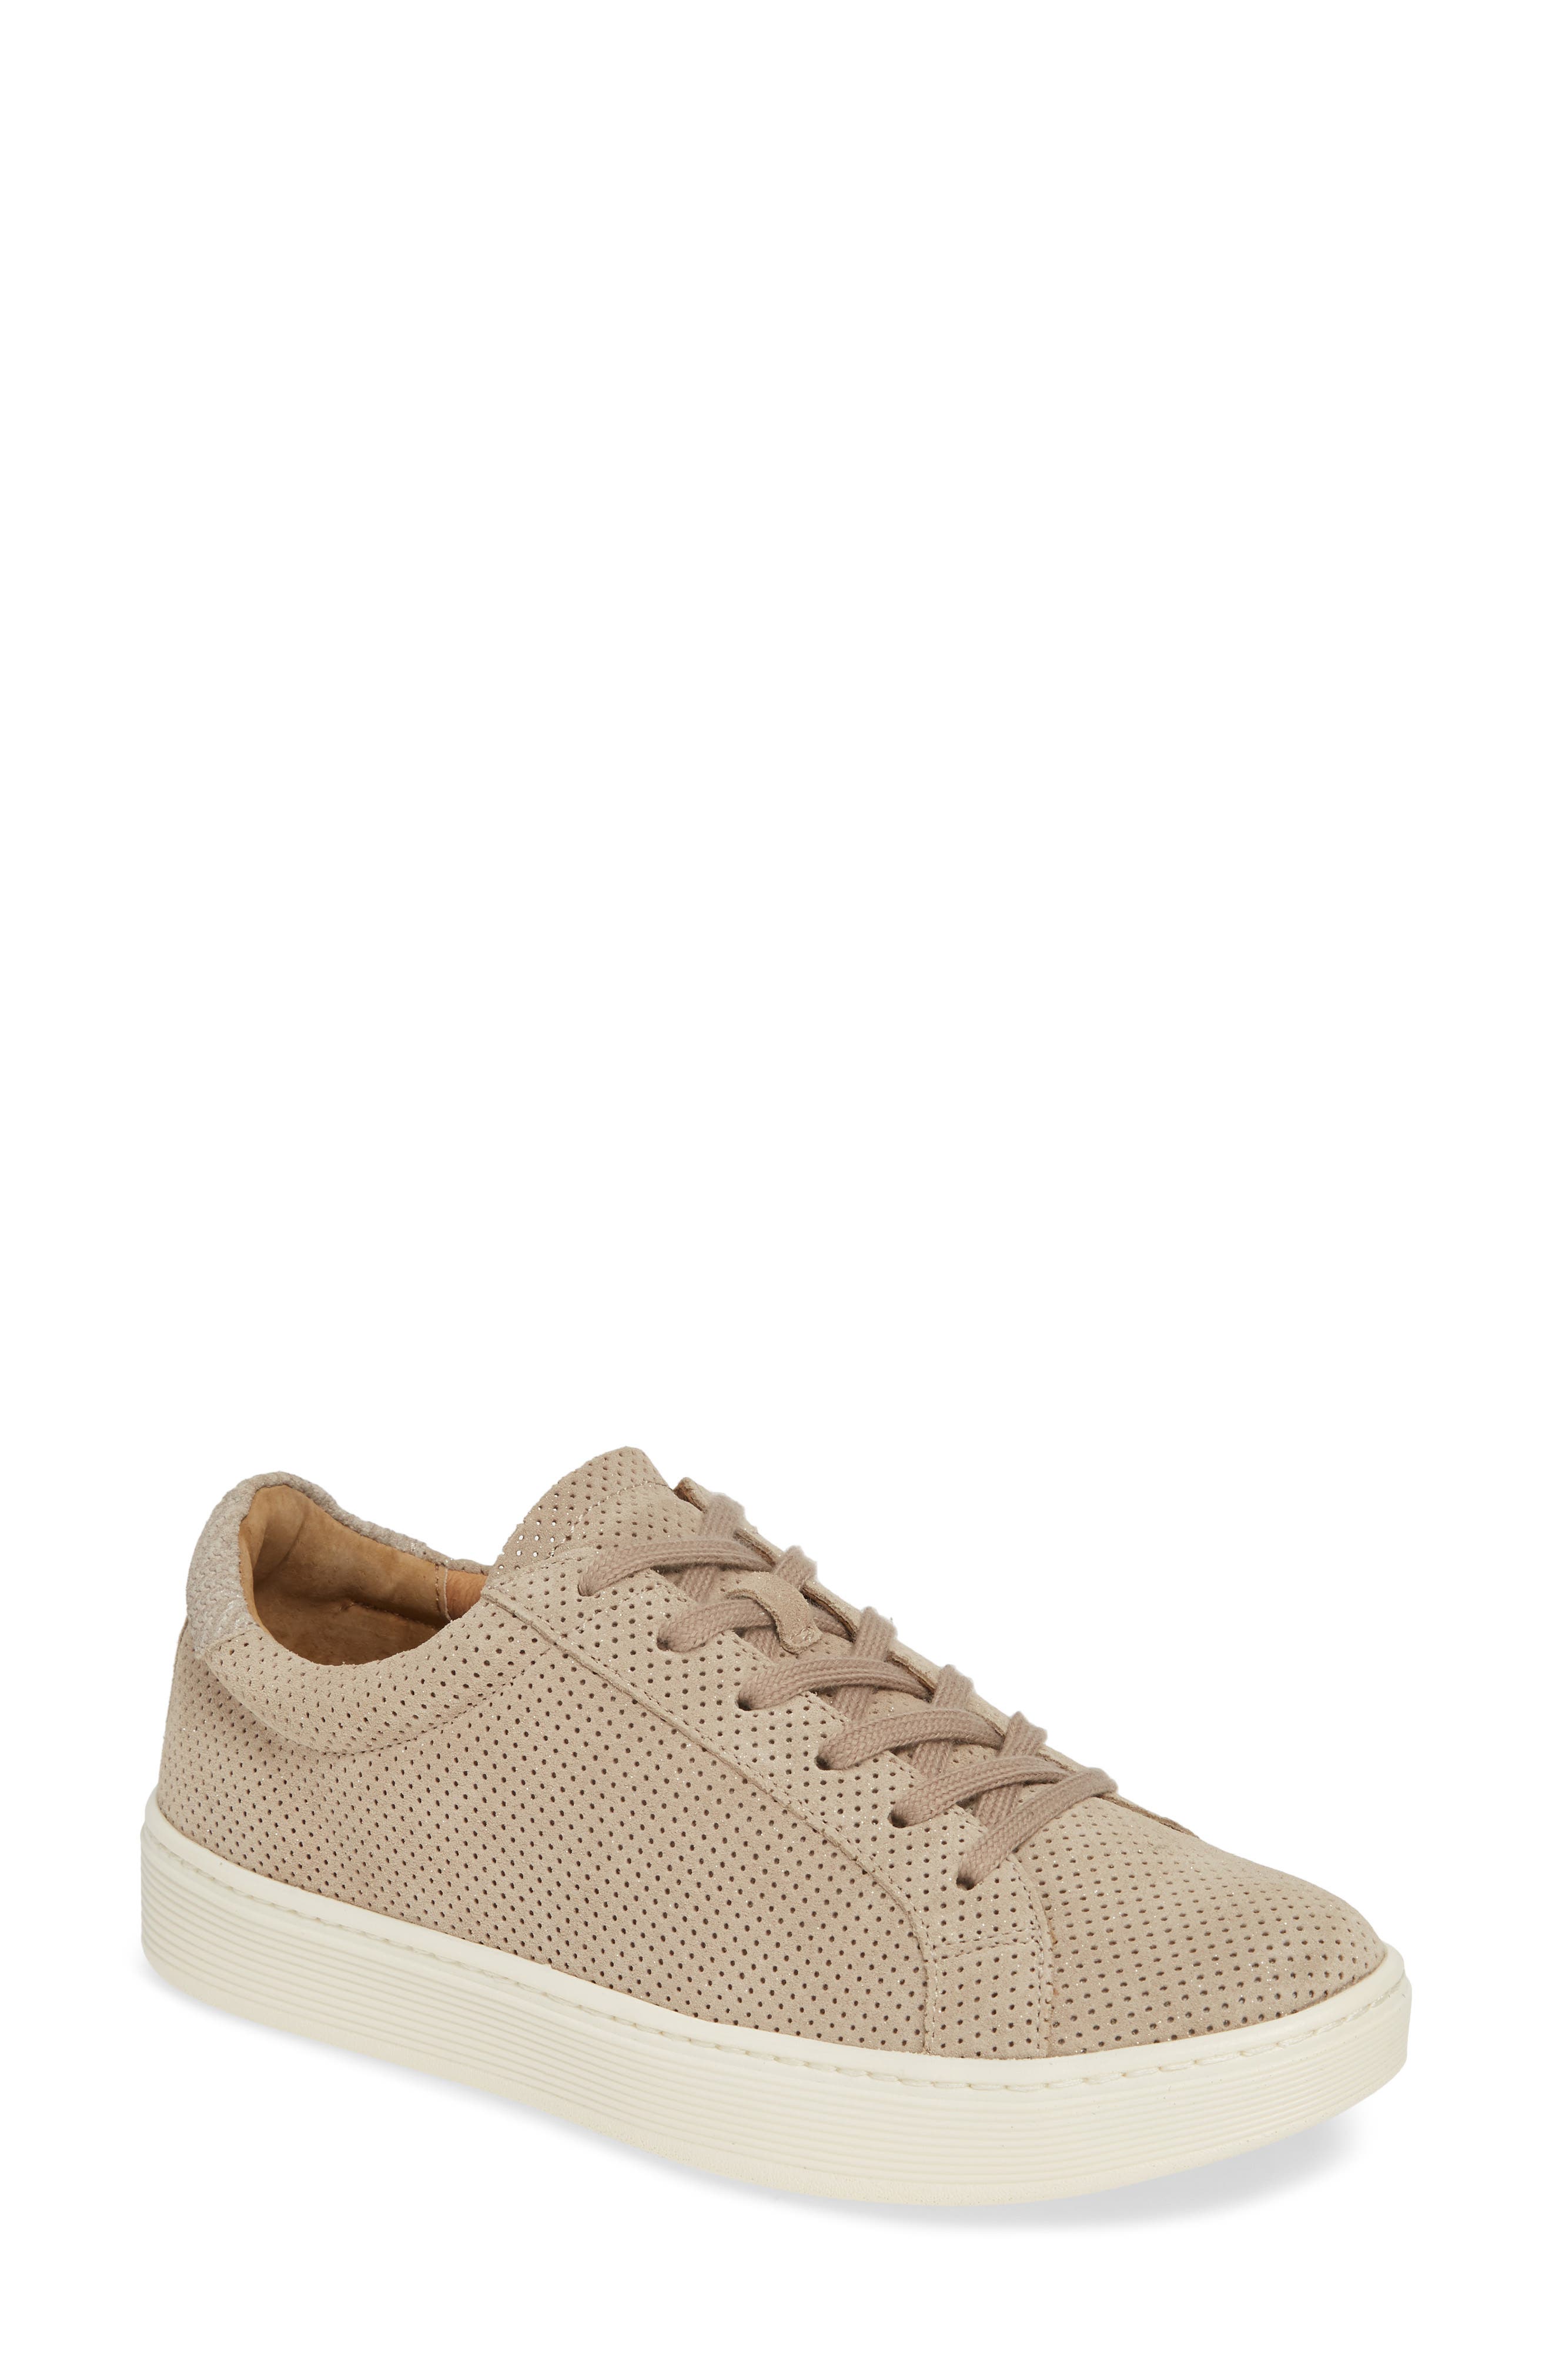 sofft somers perforated sneaker